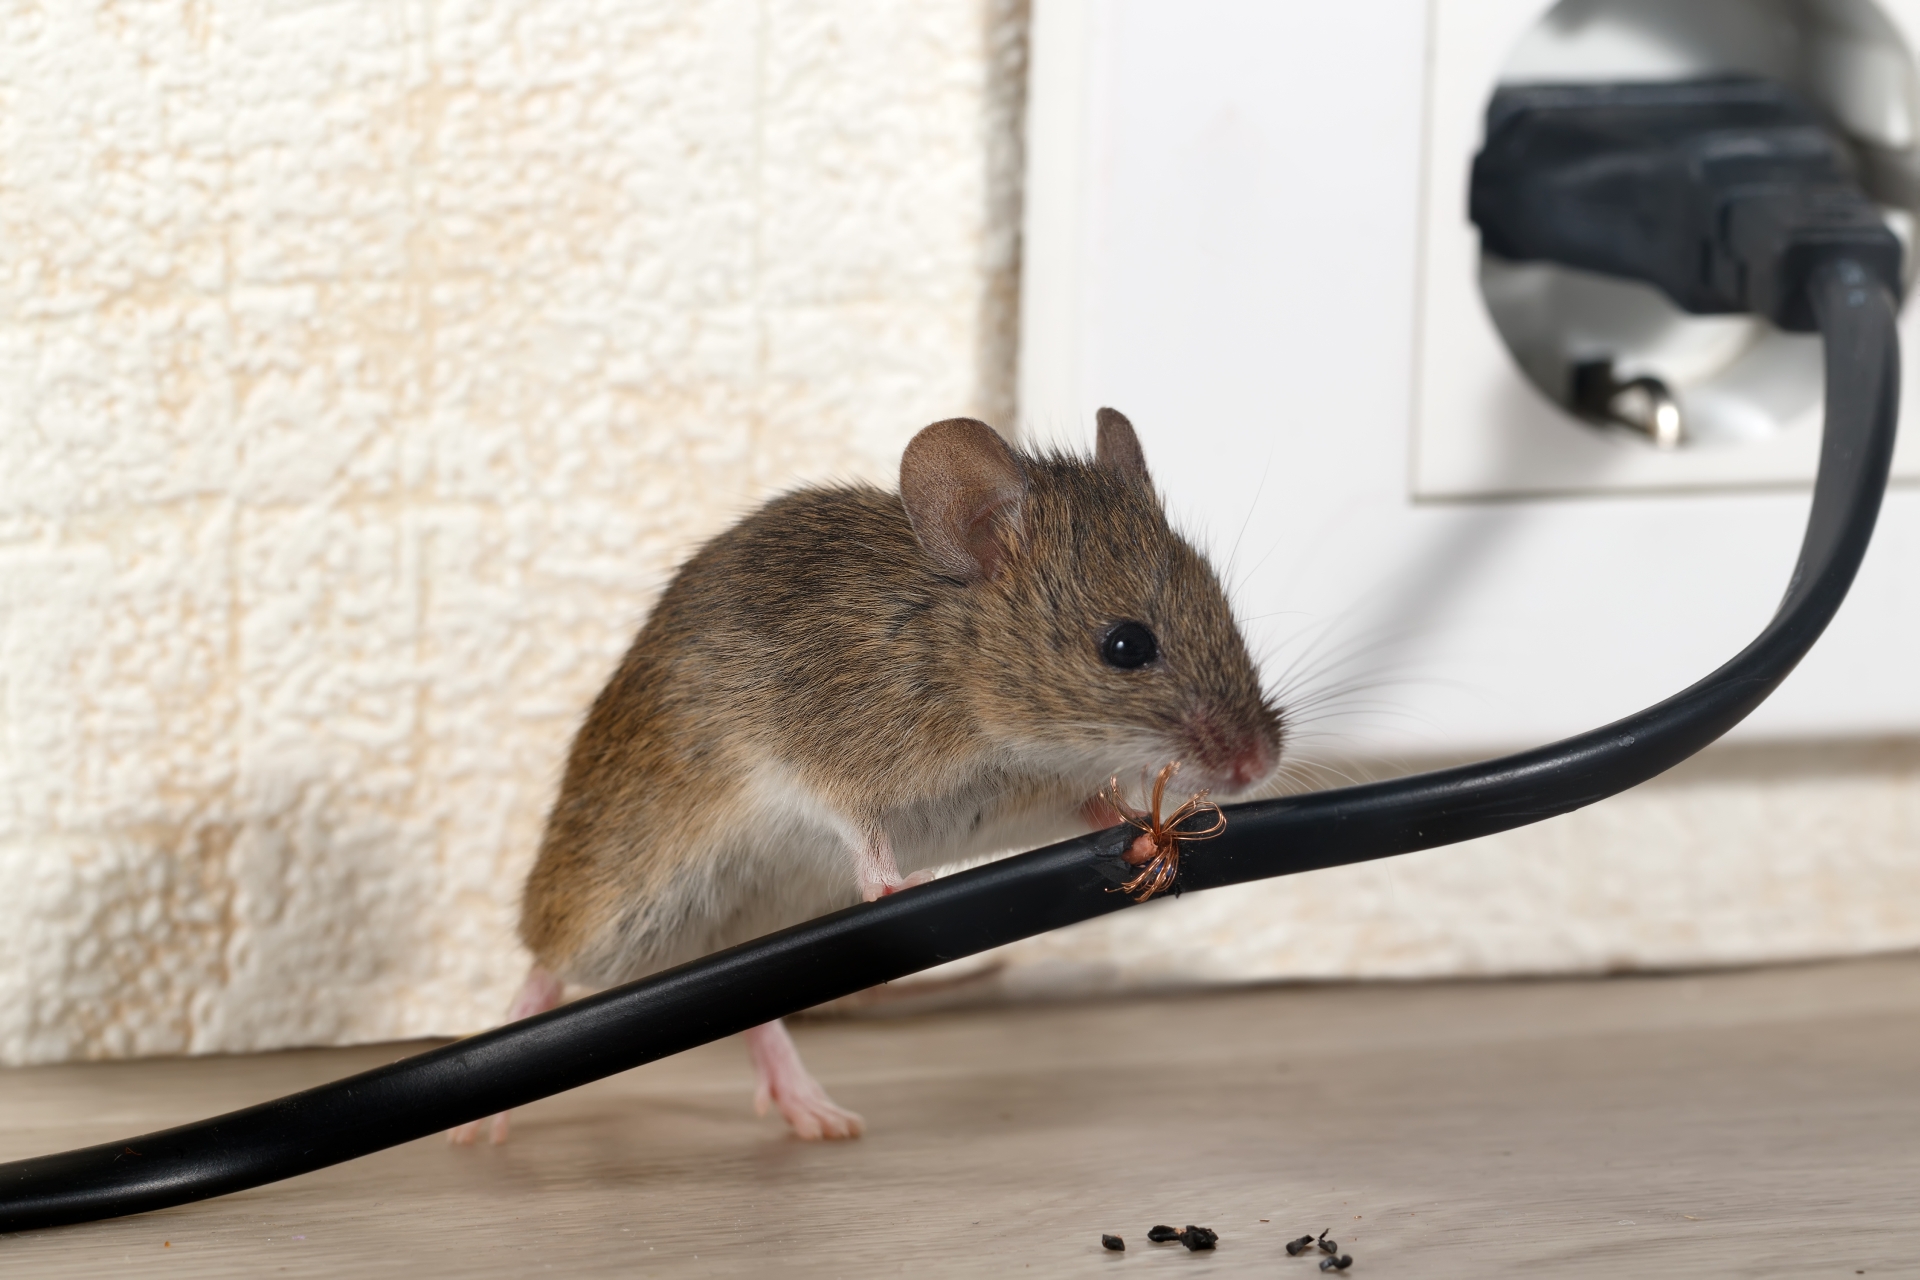 Mice Infestation, Pest Control in Warlingham, Chelsham, CR6. Call Now 020 8166 9746